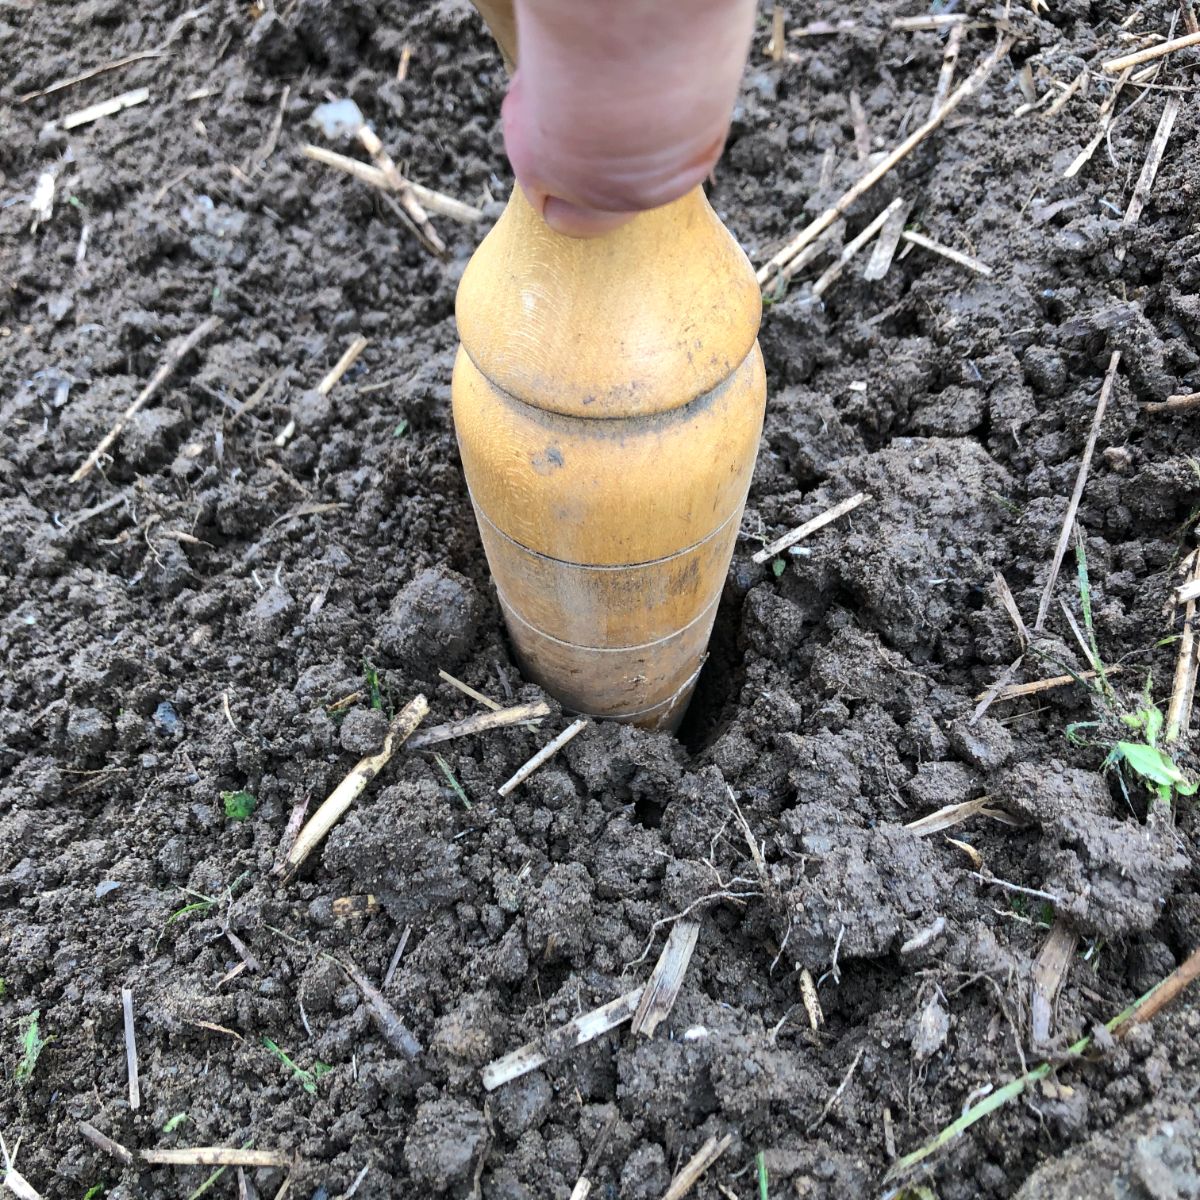 Digging a hole for a spring bulb